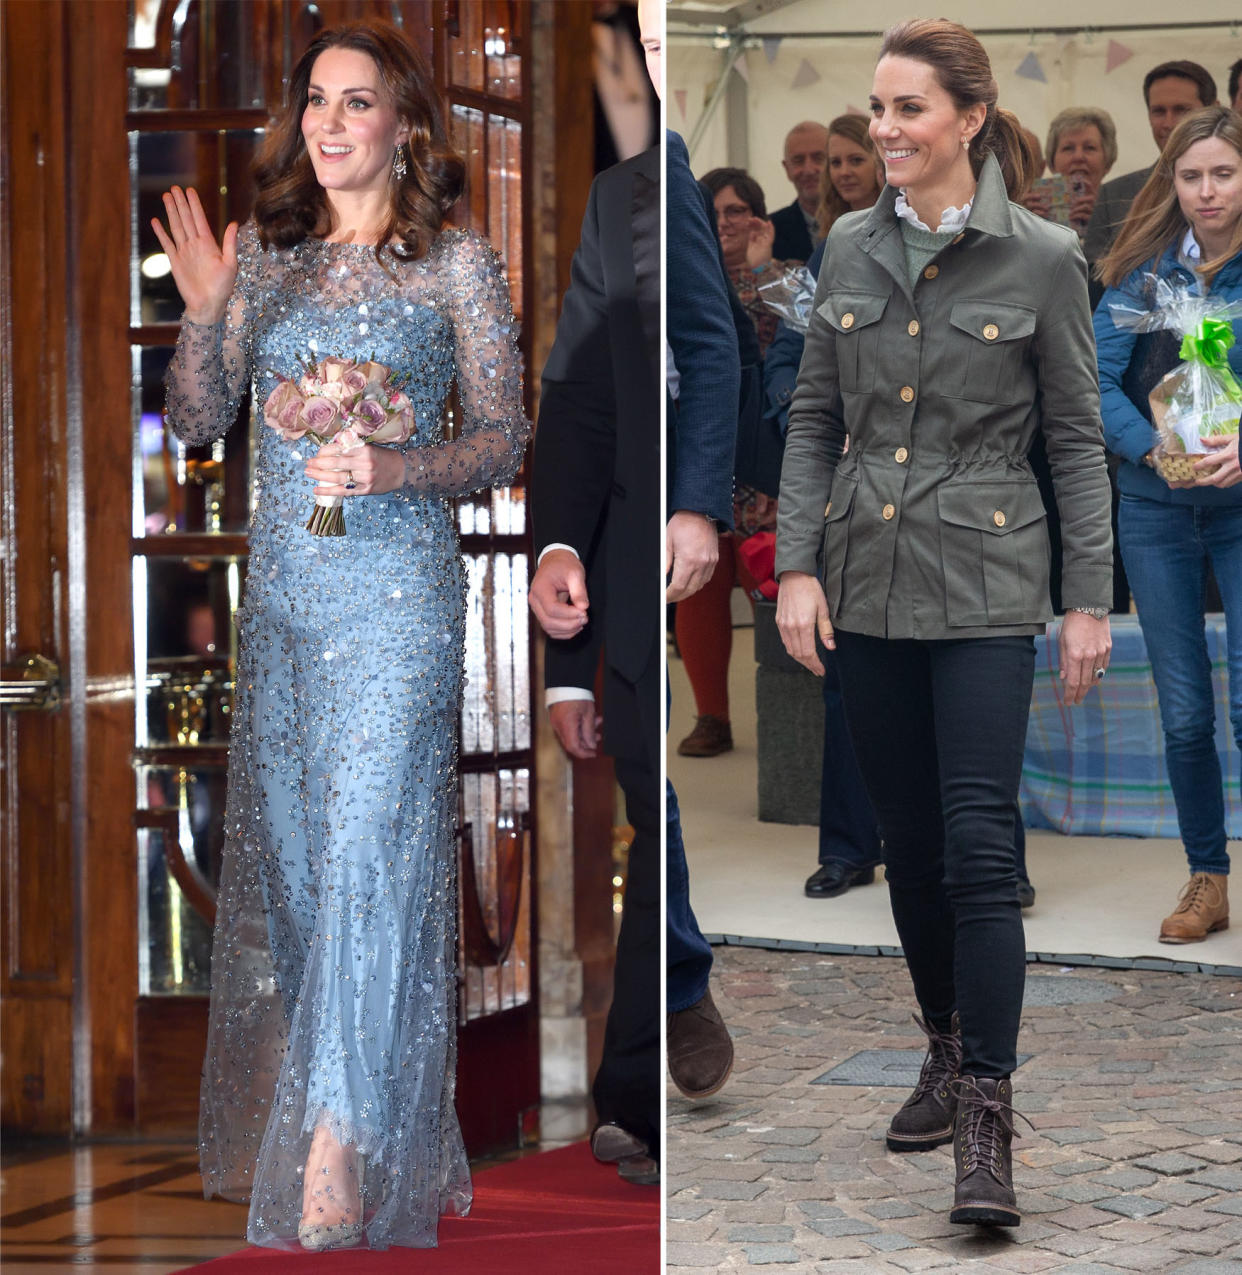 One fan was wondering why Kate swapped her Elsa gown for a country look. Photo: Getty Images